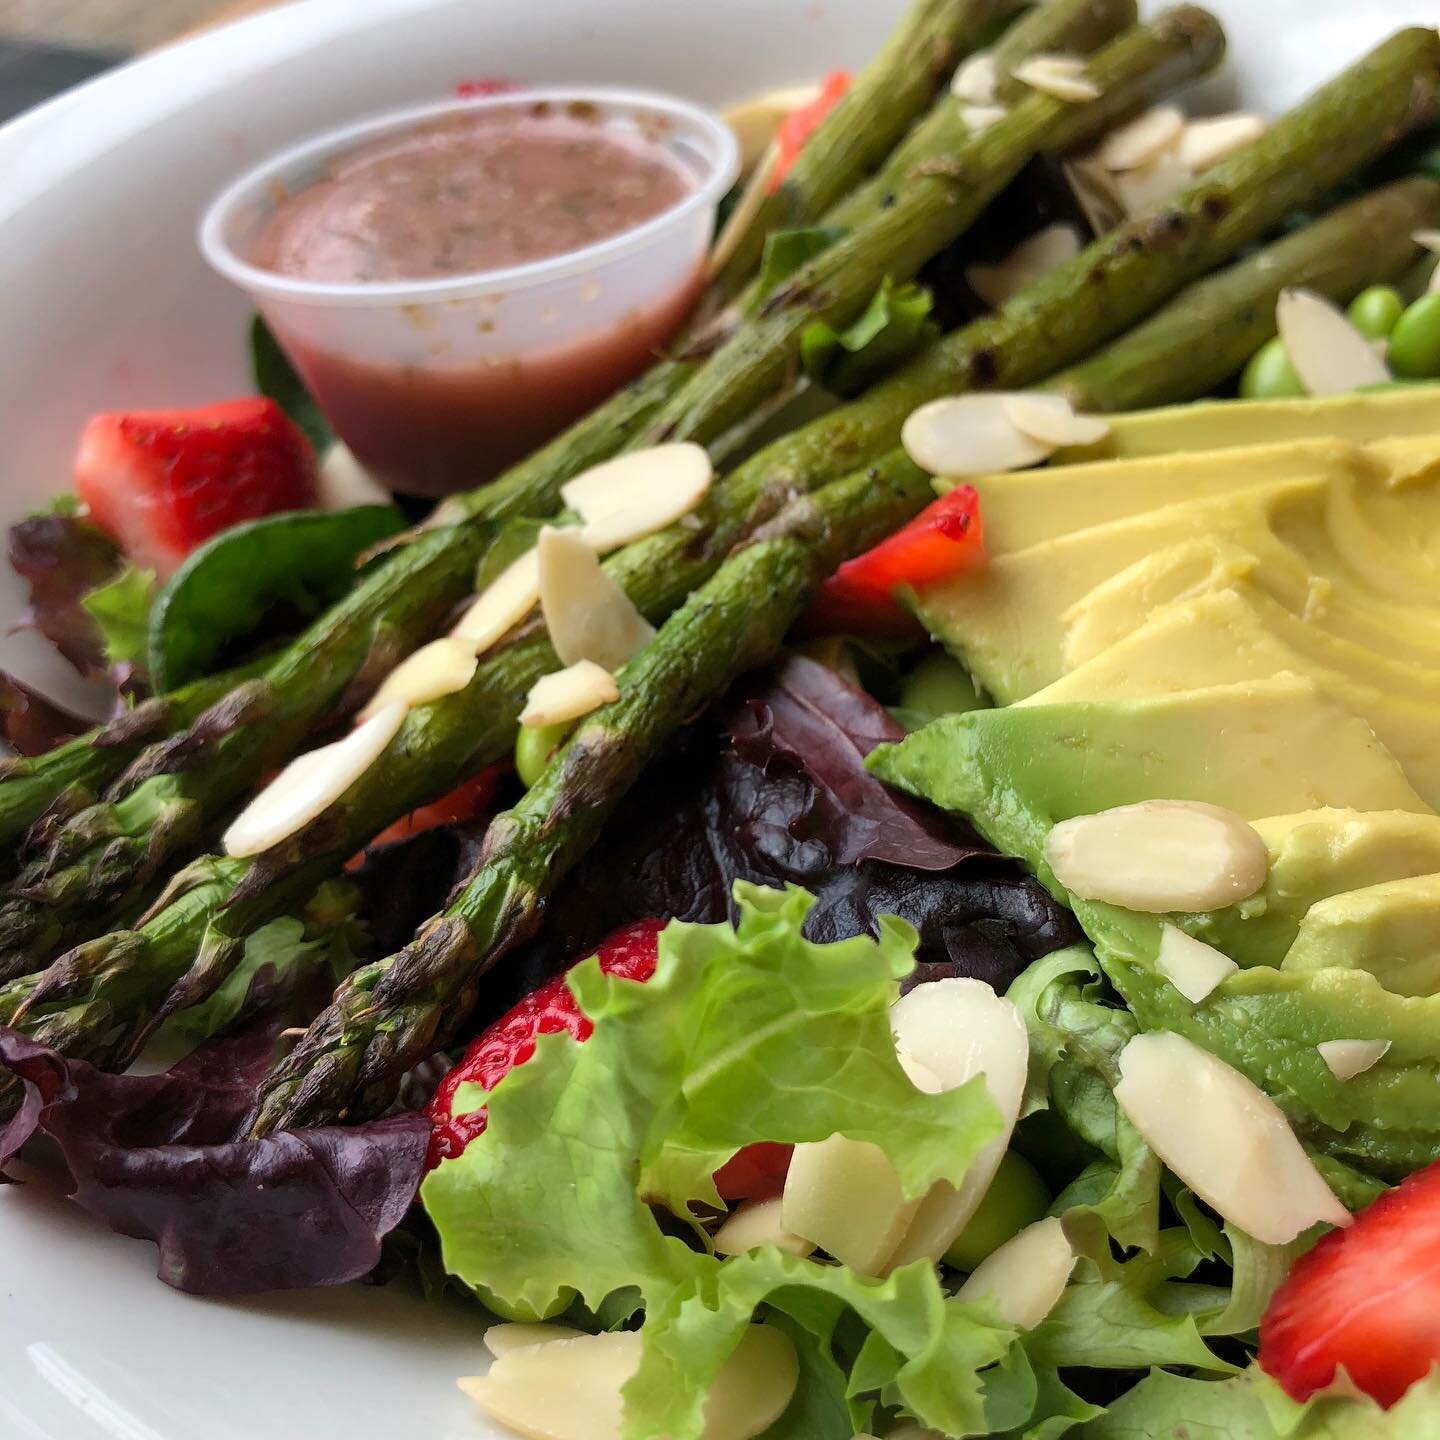 Happy St. Patrick's Day 🍀! Need some greens? We have plenty at Batavia every day 😄. Check our salad special 🥗 today: mixed greens and spinach topped with avocado 🥑, grilled asparagus, fresh strawberries 🍓, edamame, and toasted almonds drizzled w